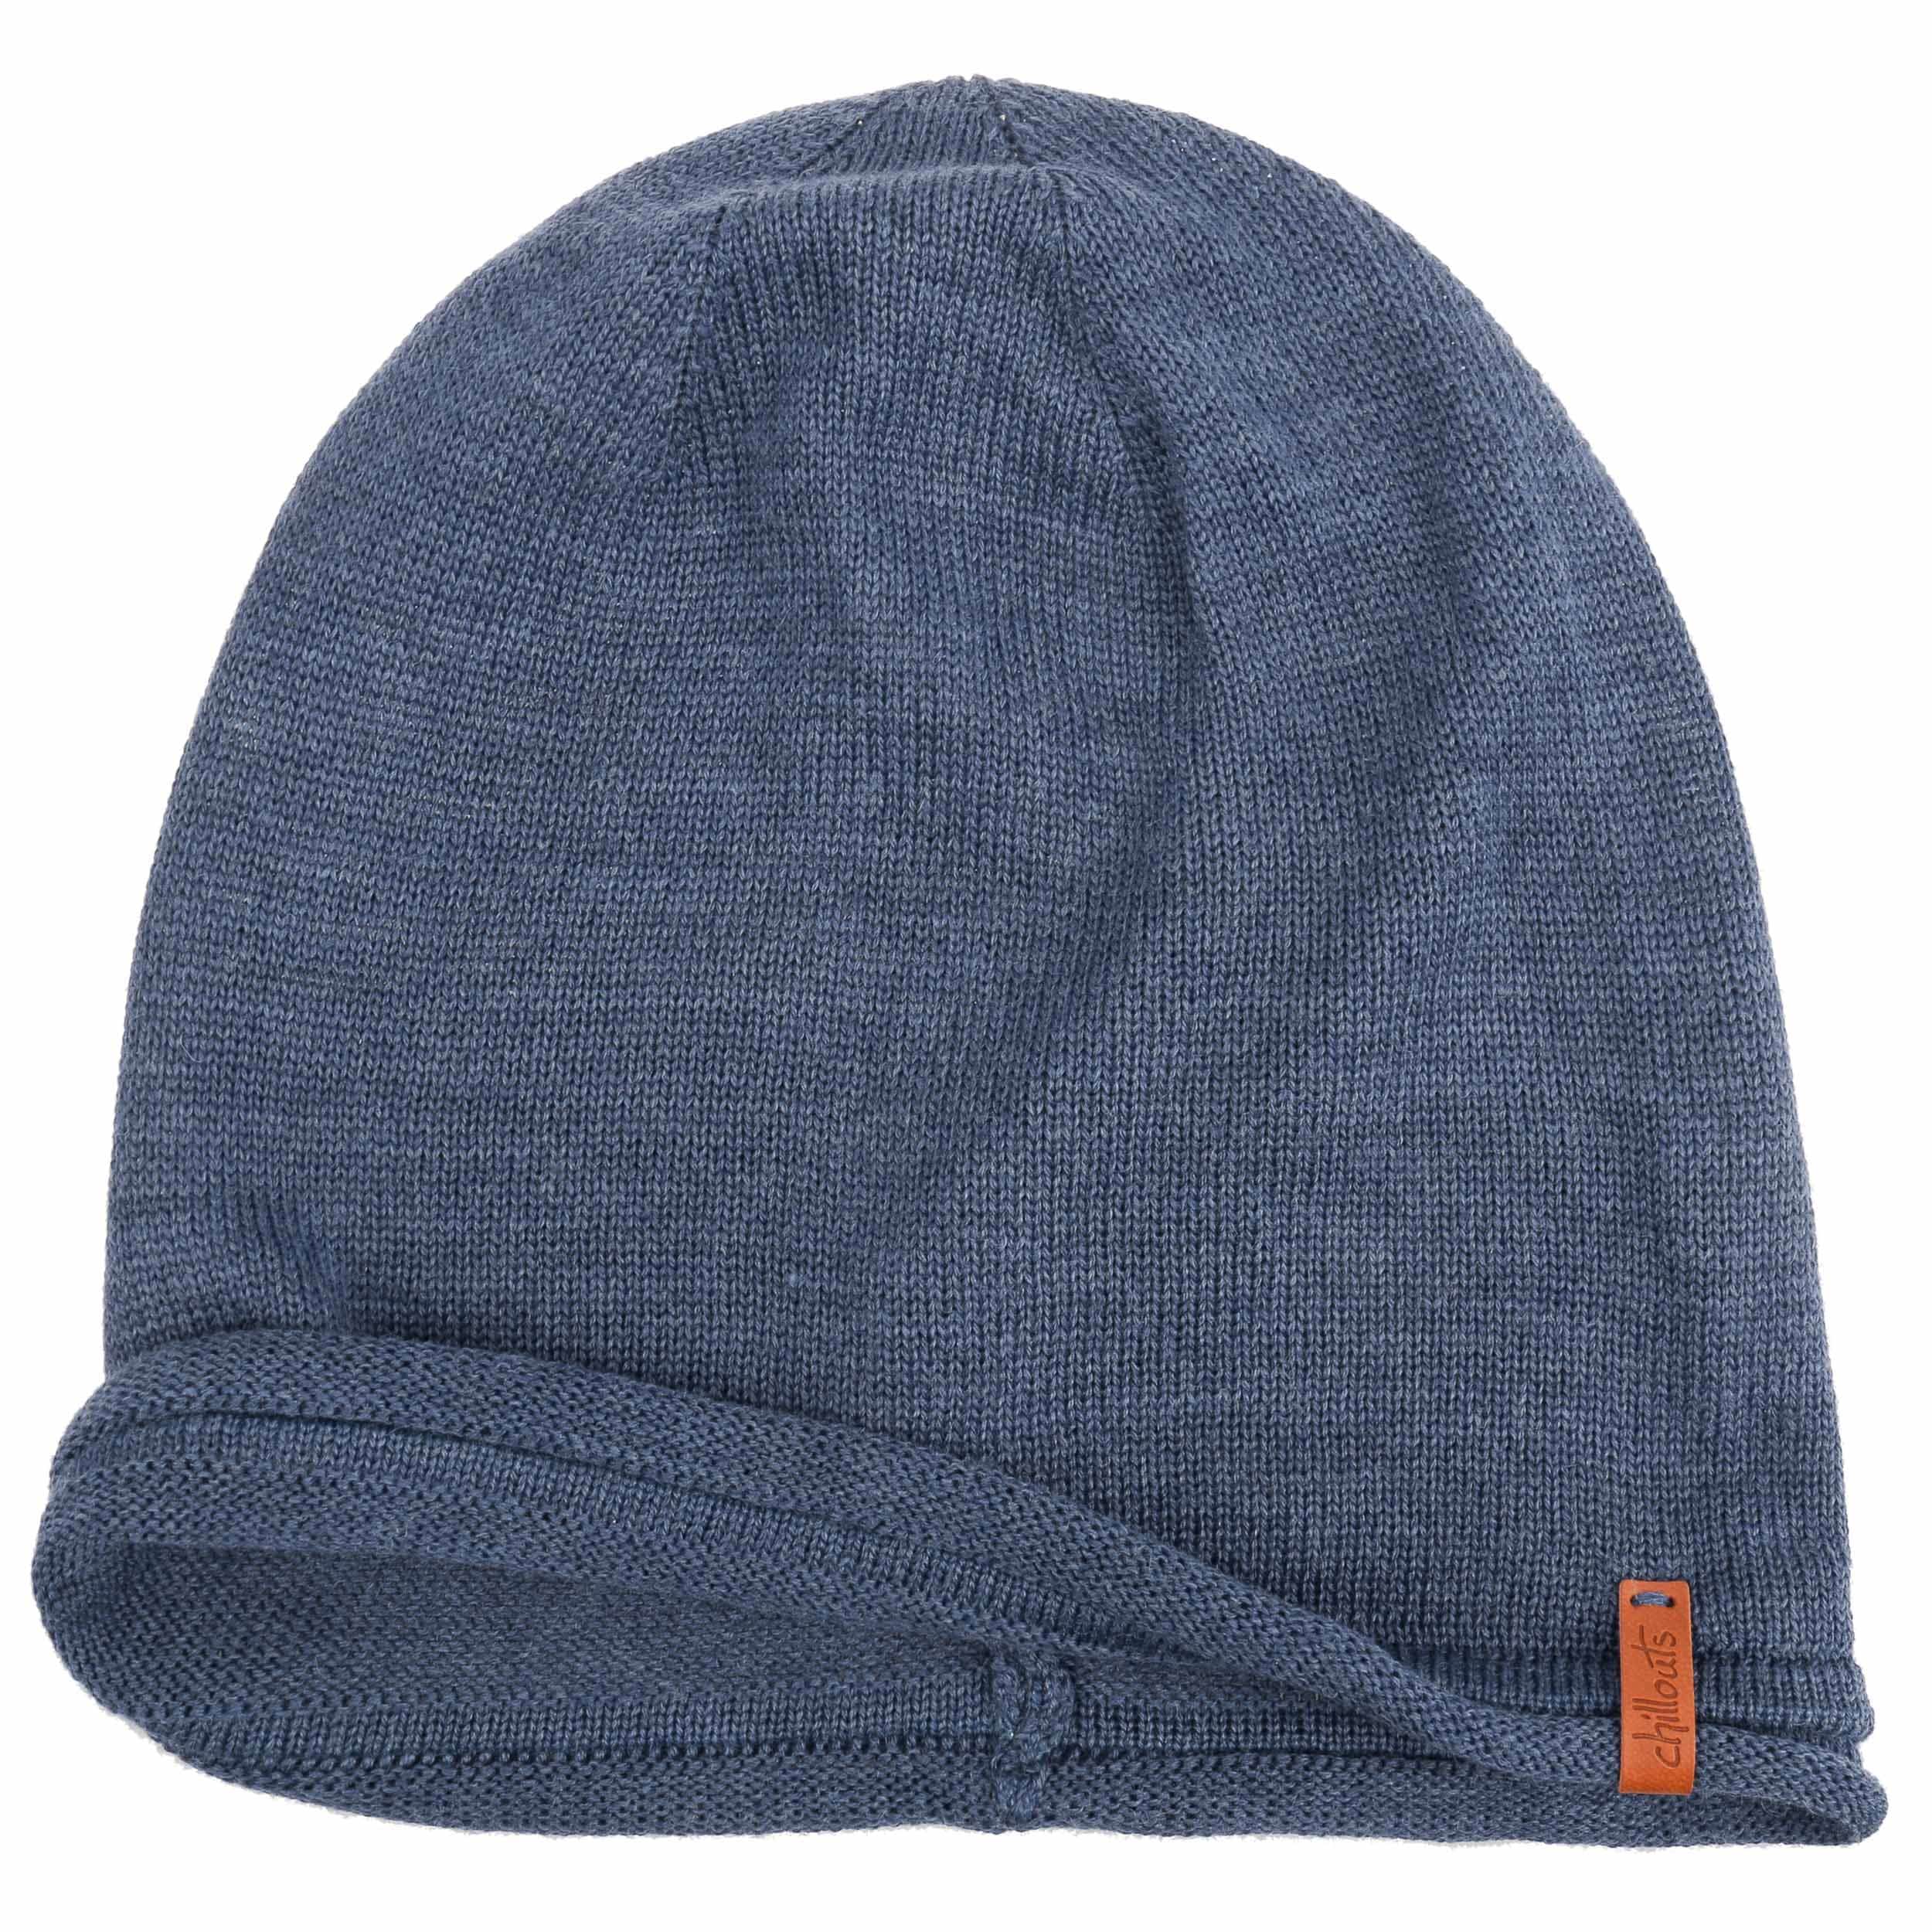 Leicester Oversize Beanie by Chillouts - 29,95 €